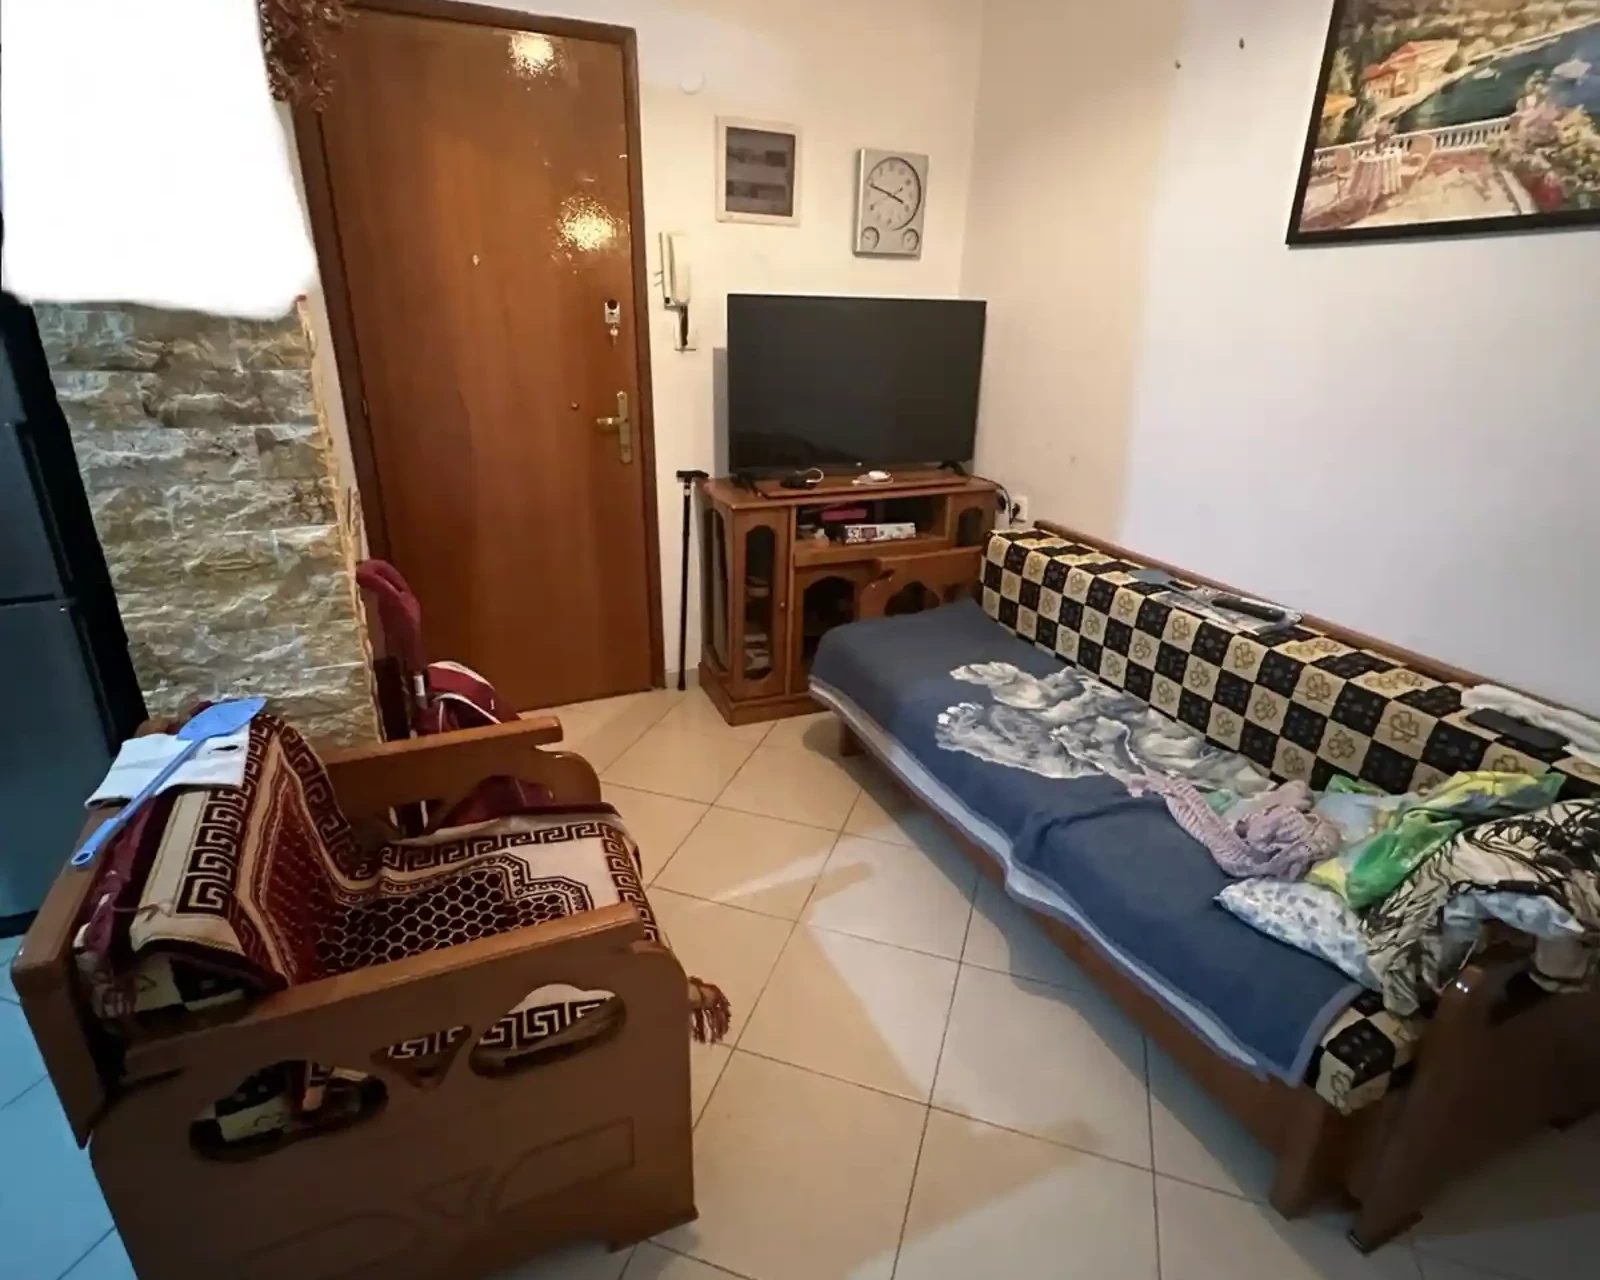 2-bedroom apartment fоr sаle €100.000, image 1